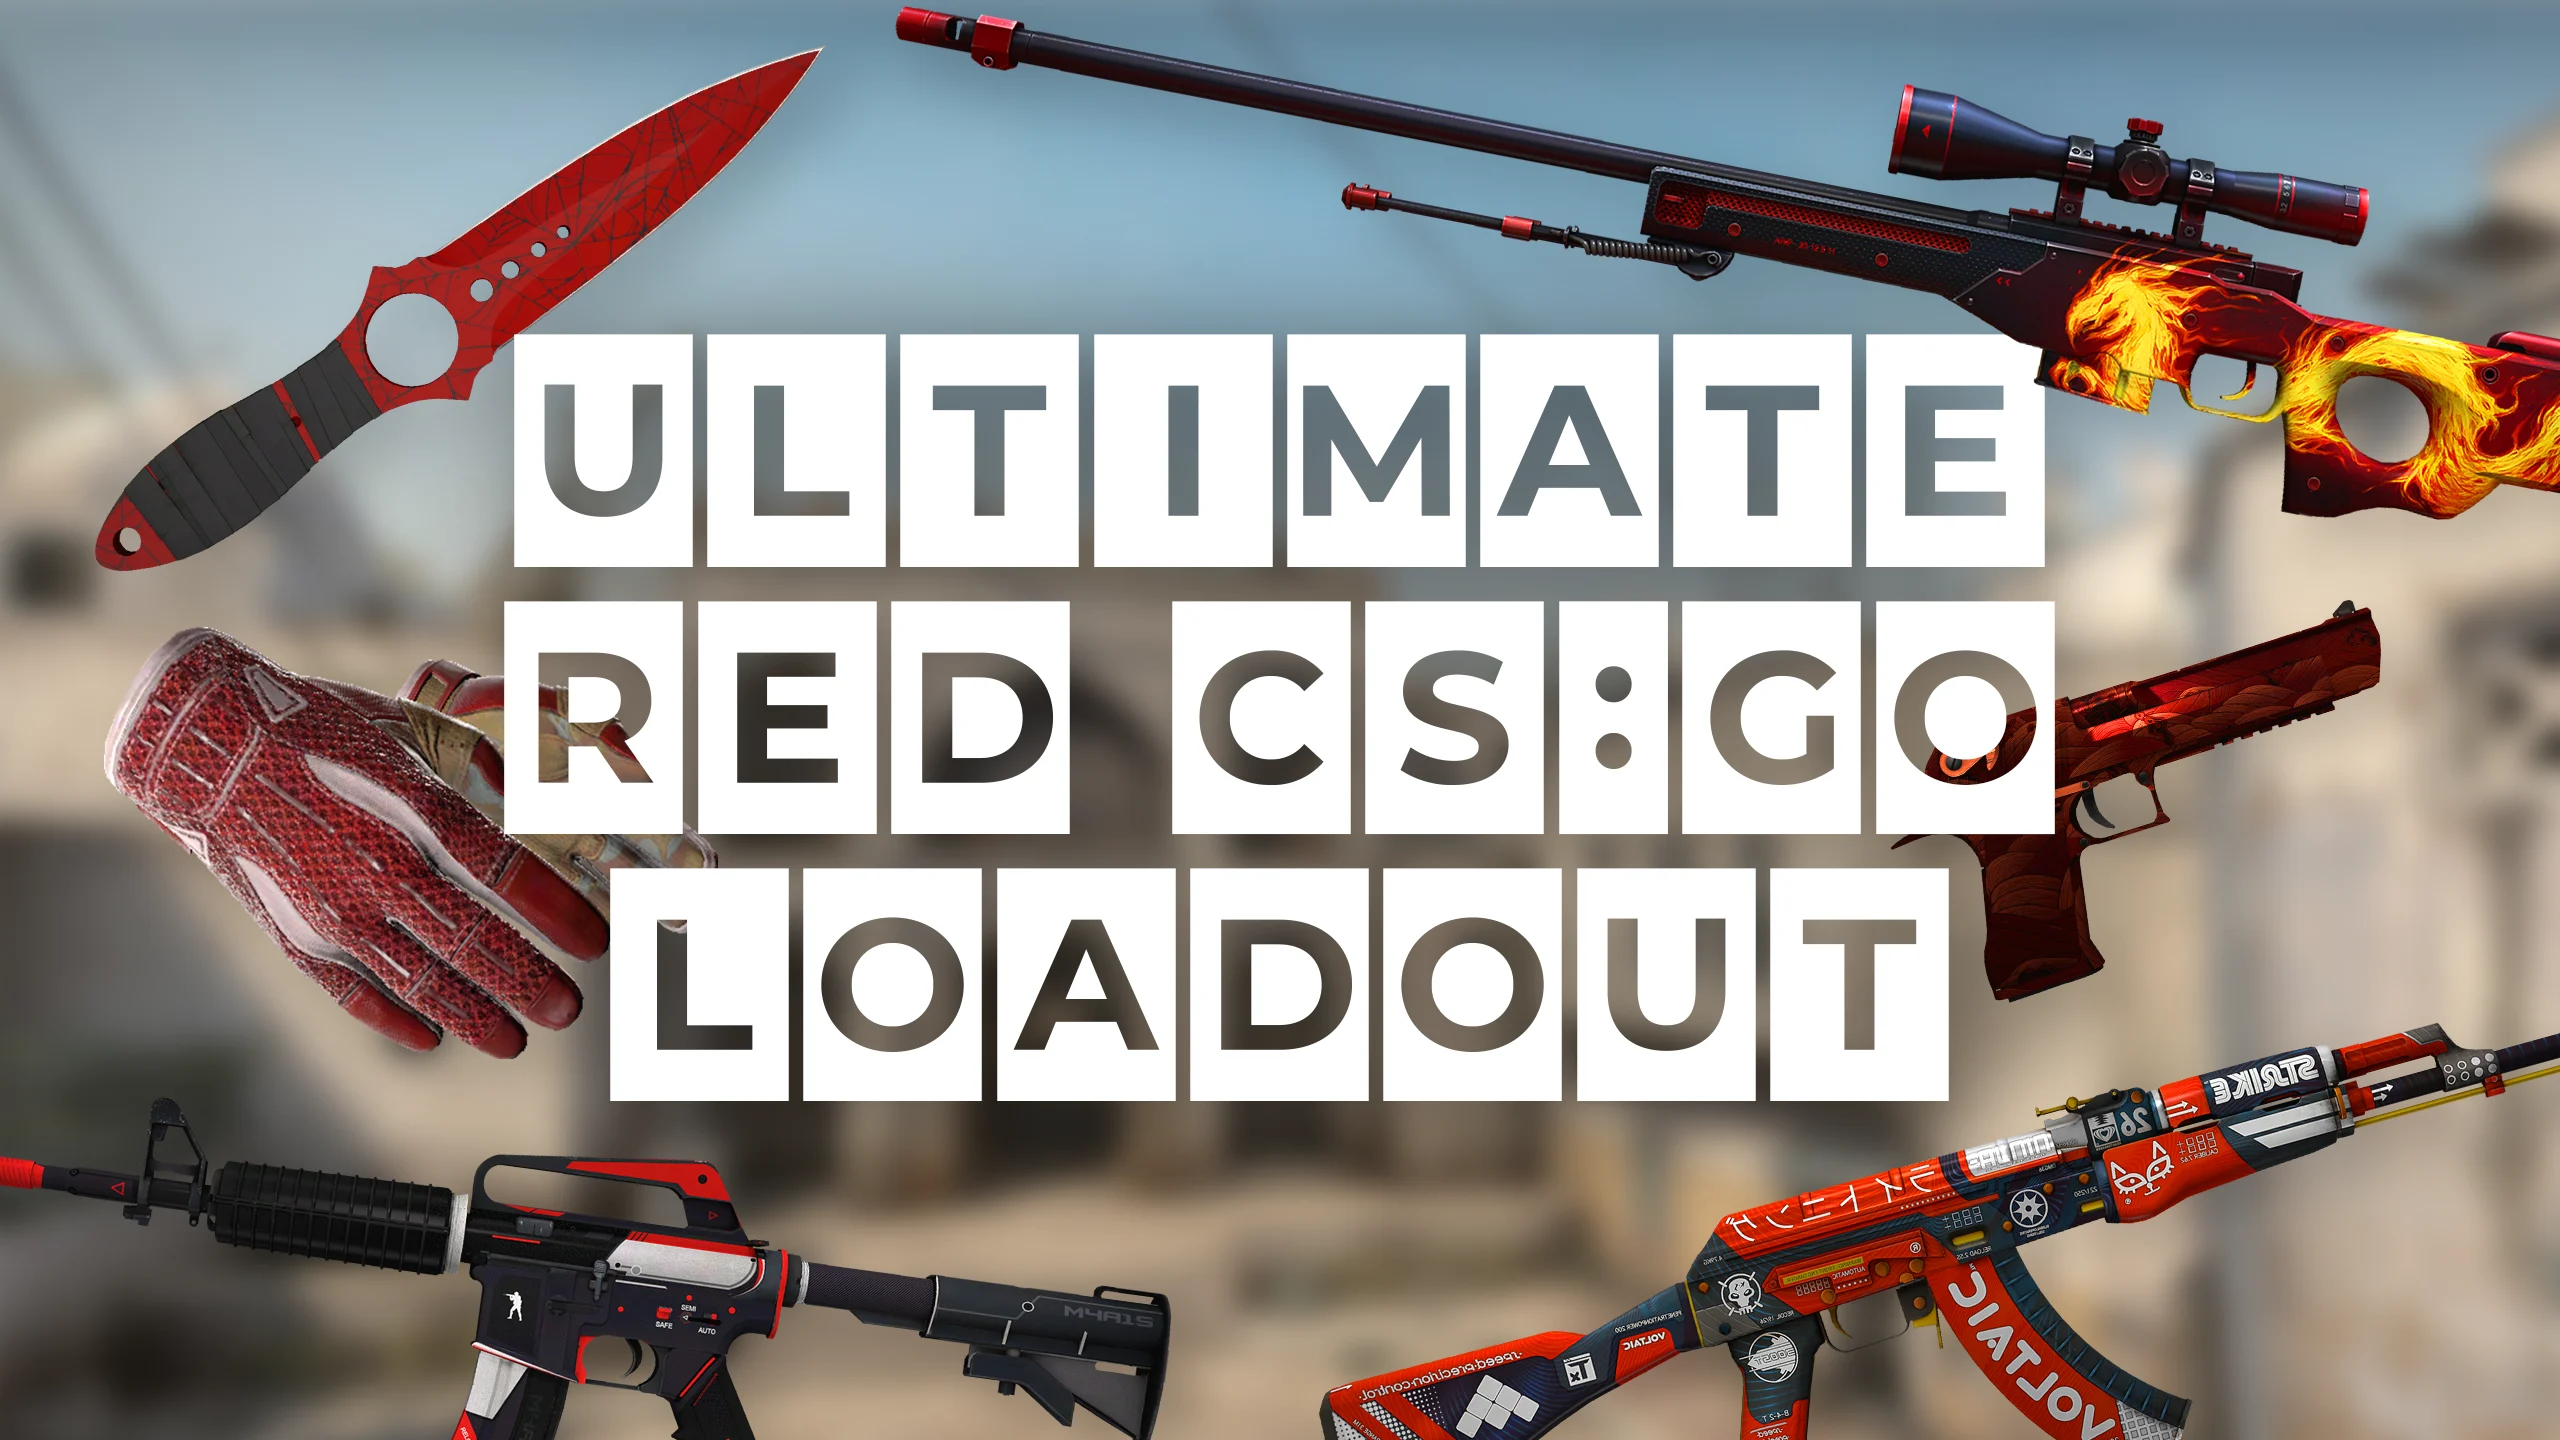 Ultimate Red CS:GO Loadout